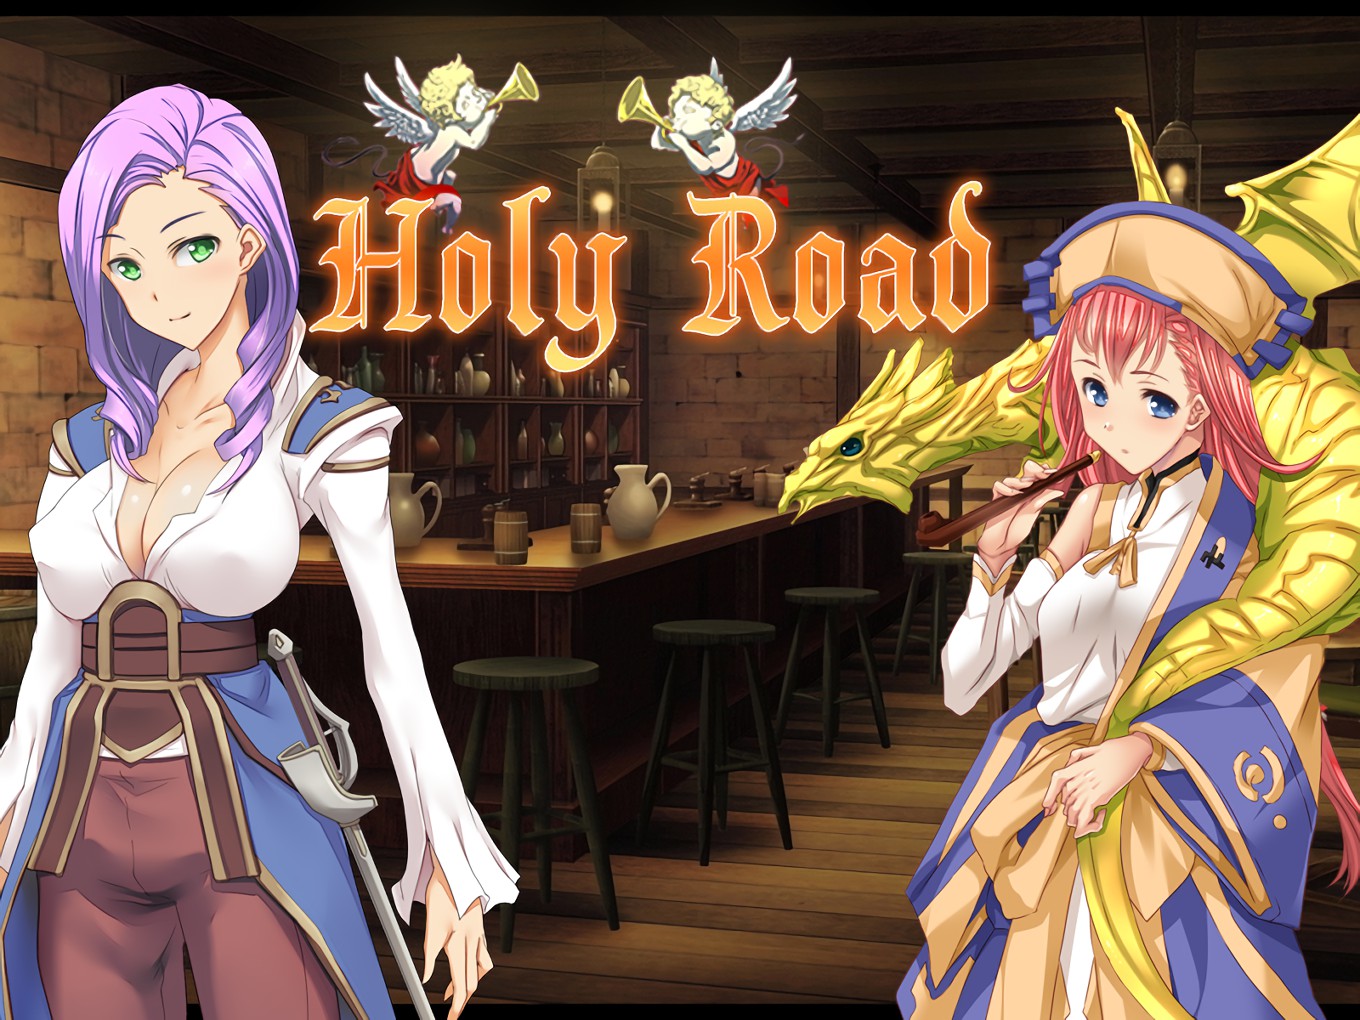 Holy road porn games